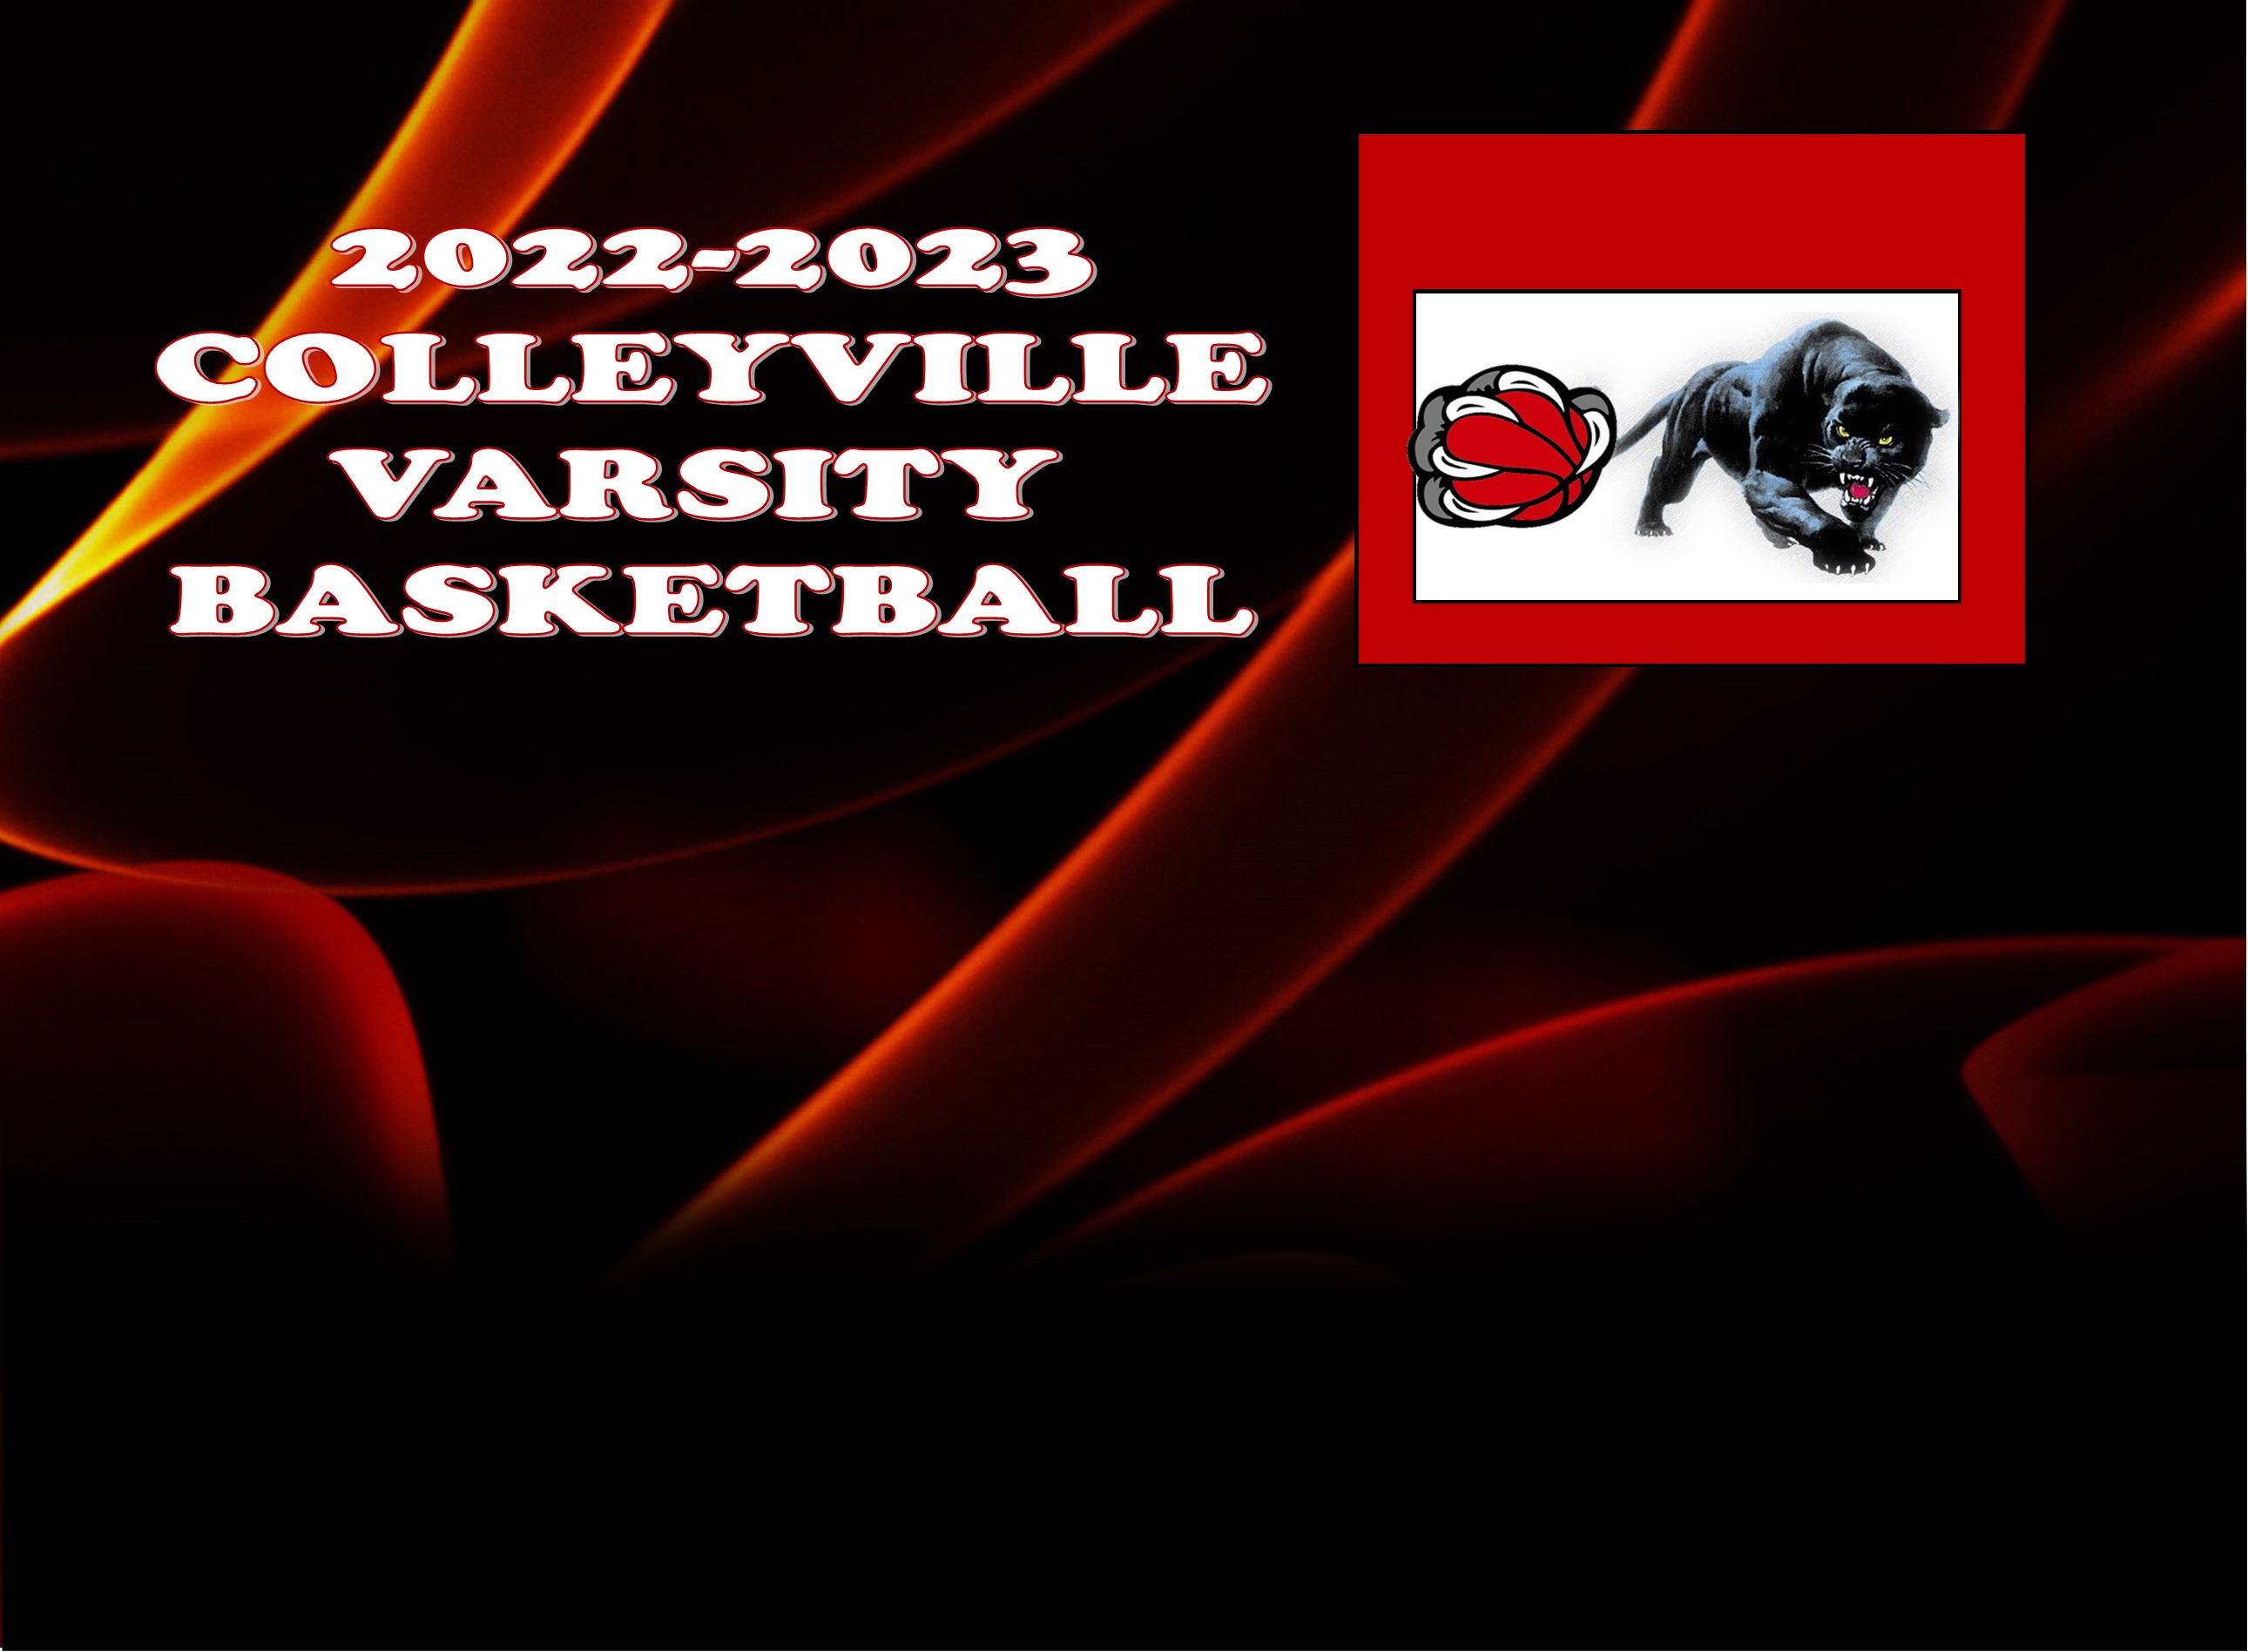 CHHS Varsity Basketball: Colleyville Panthers Toppled by Grapevine Mustangs in District Home Game 59-53